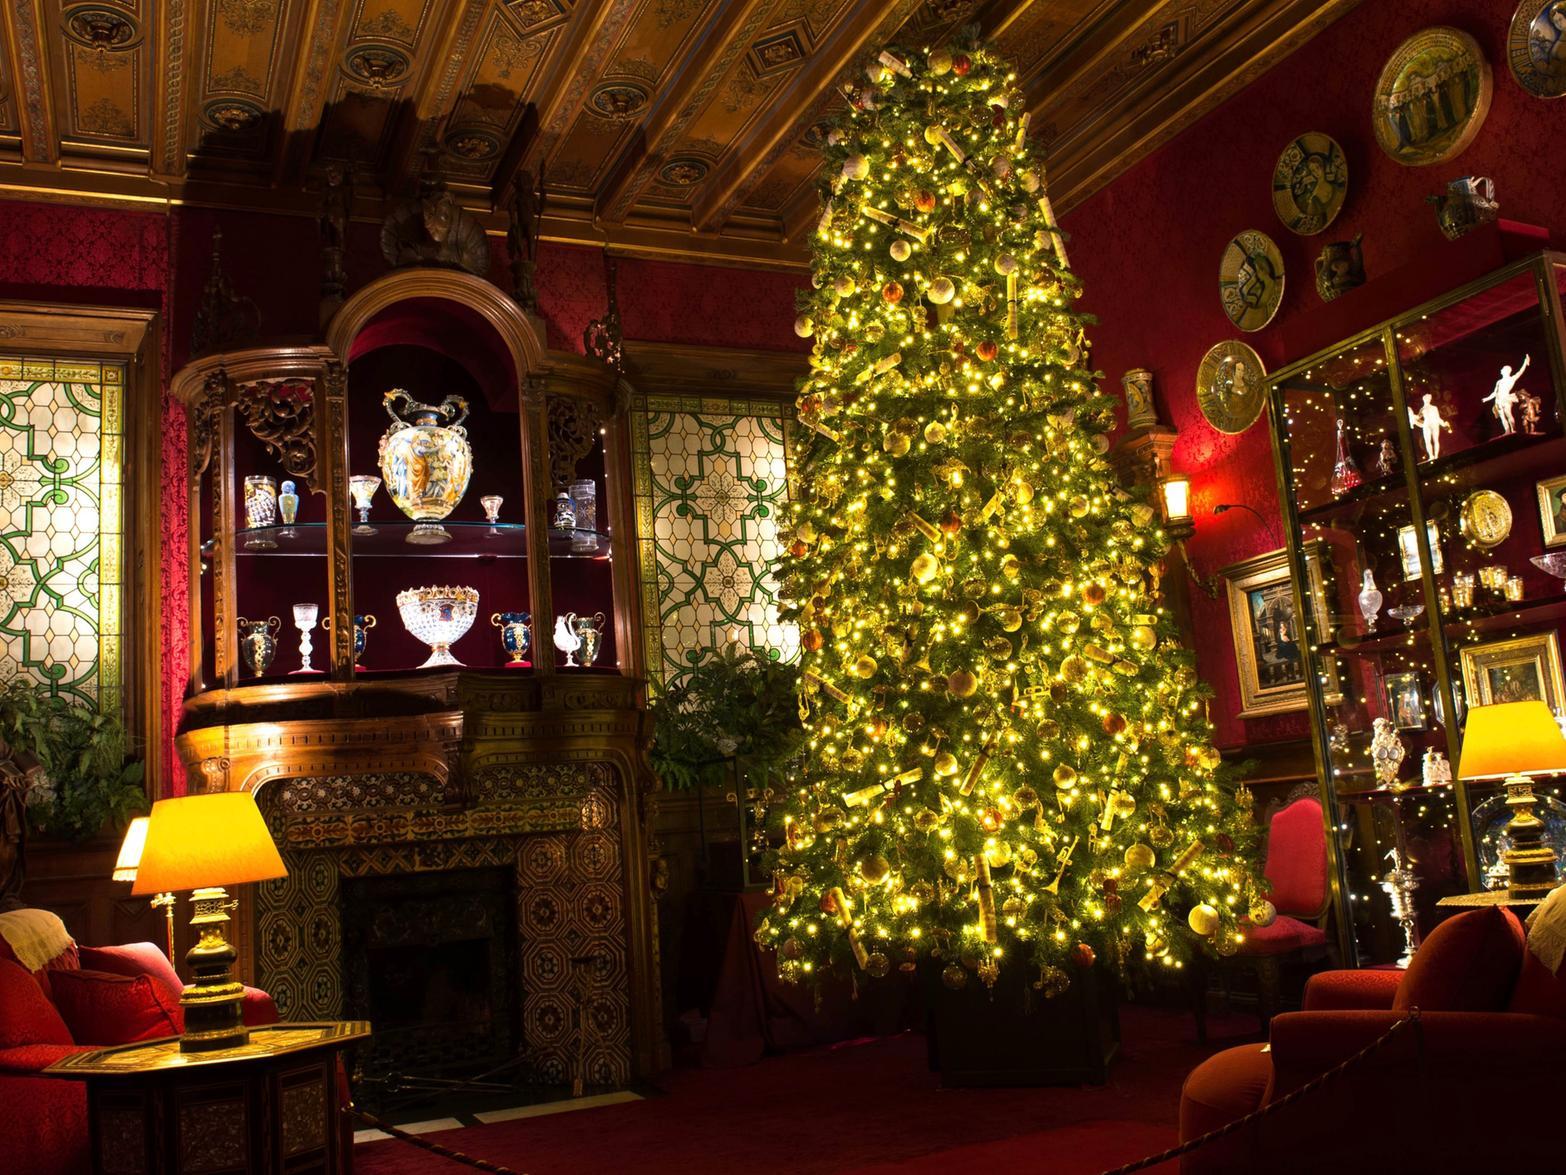 Each of the rooms on the house tour has a different Christmas decorative theme